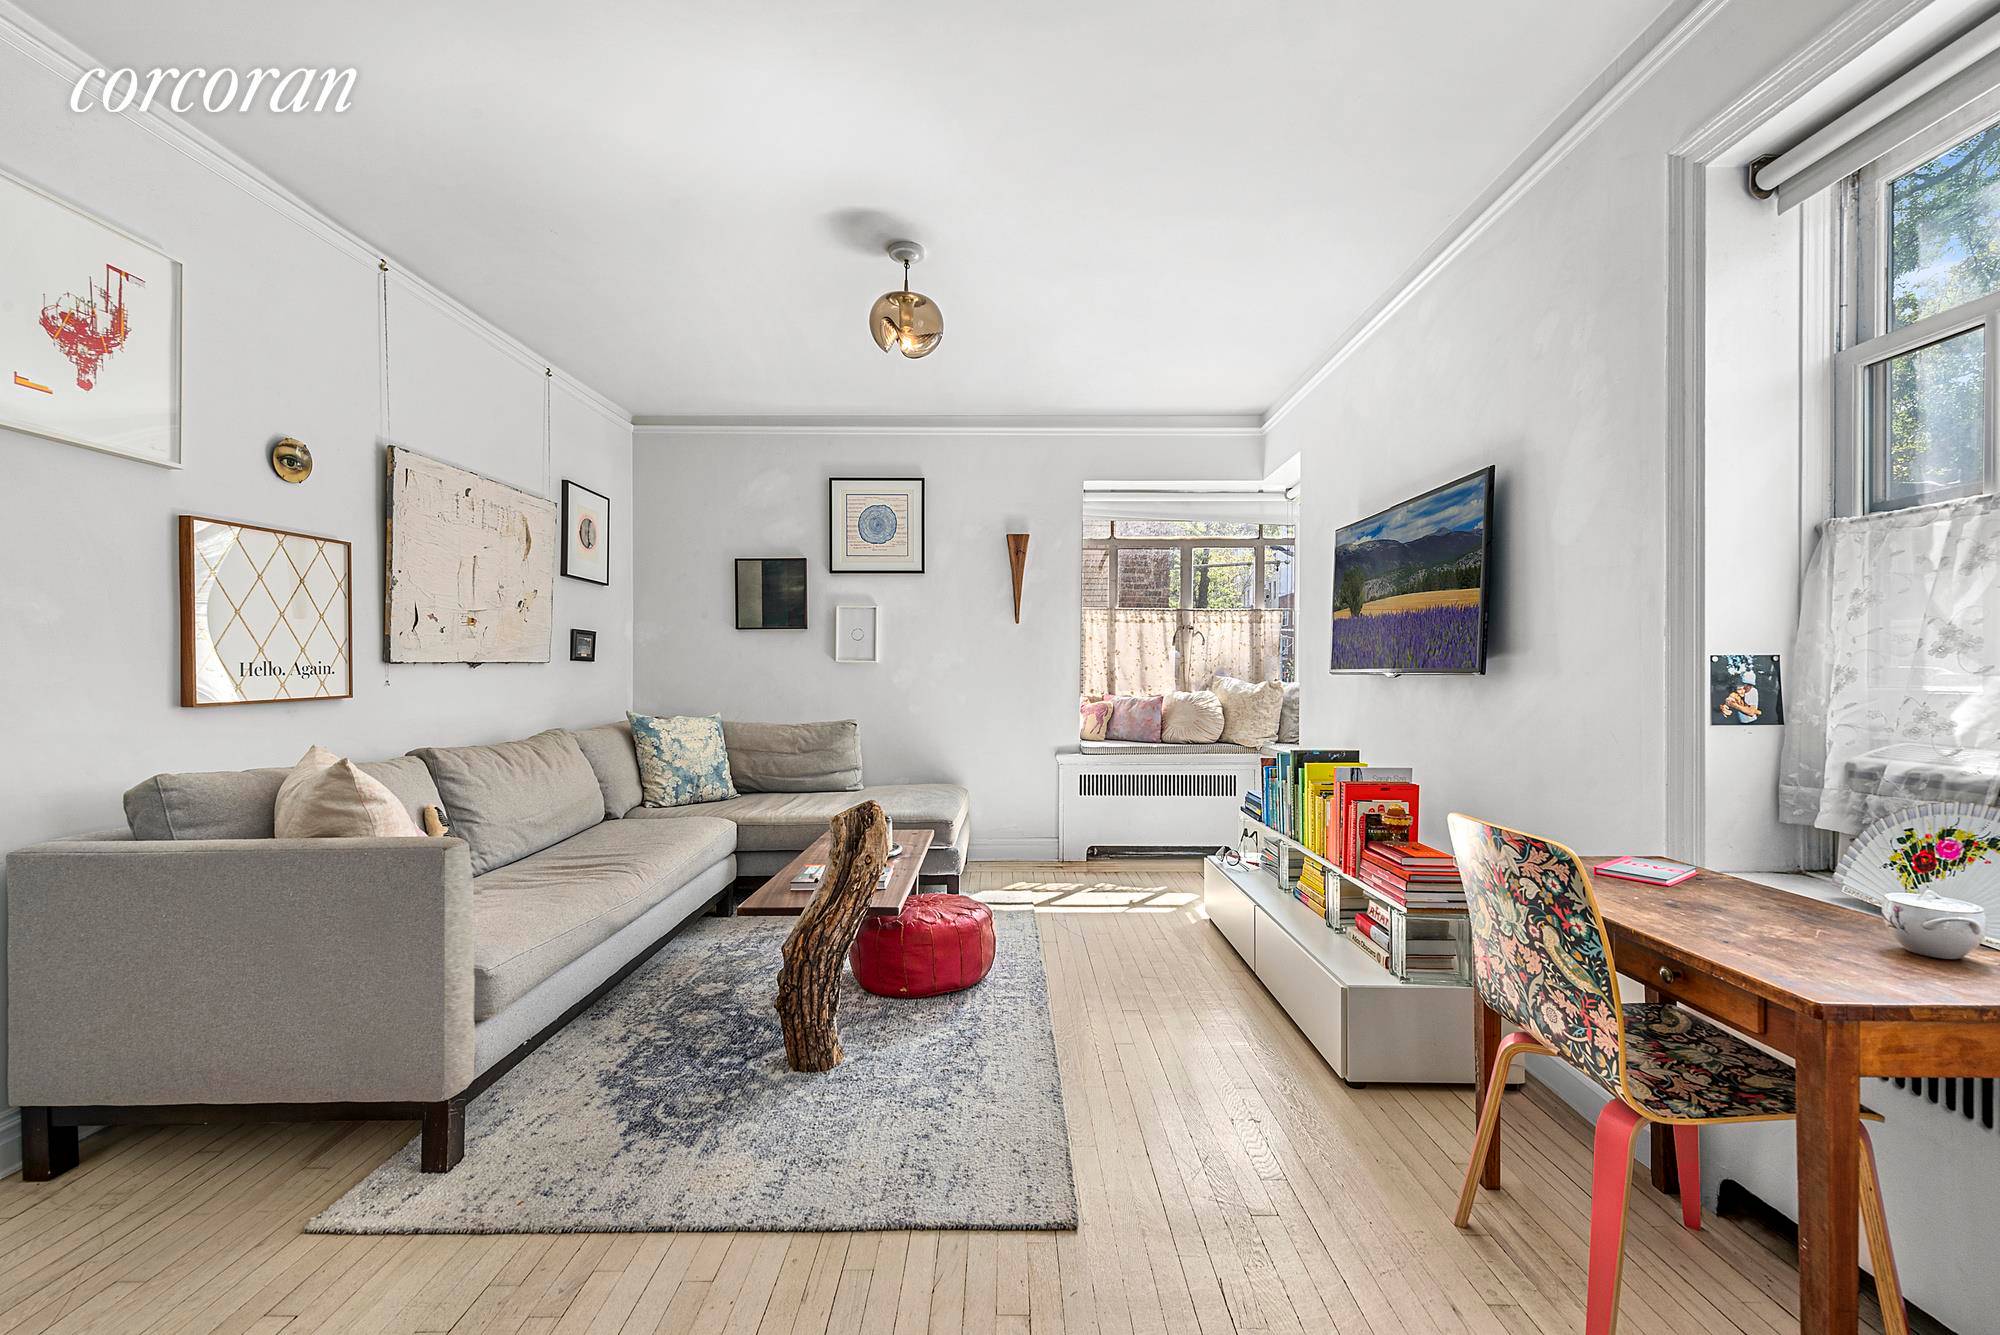 Sun drenched and serene, this thoughtfully renovated, impeccably appointed, elevated above street level, alcove studio offers gorgeous finishes and a coveted West Village location.